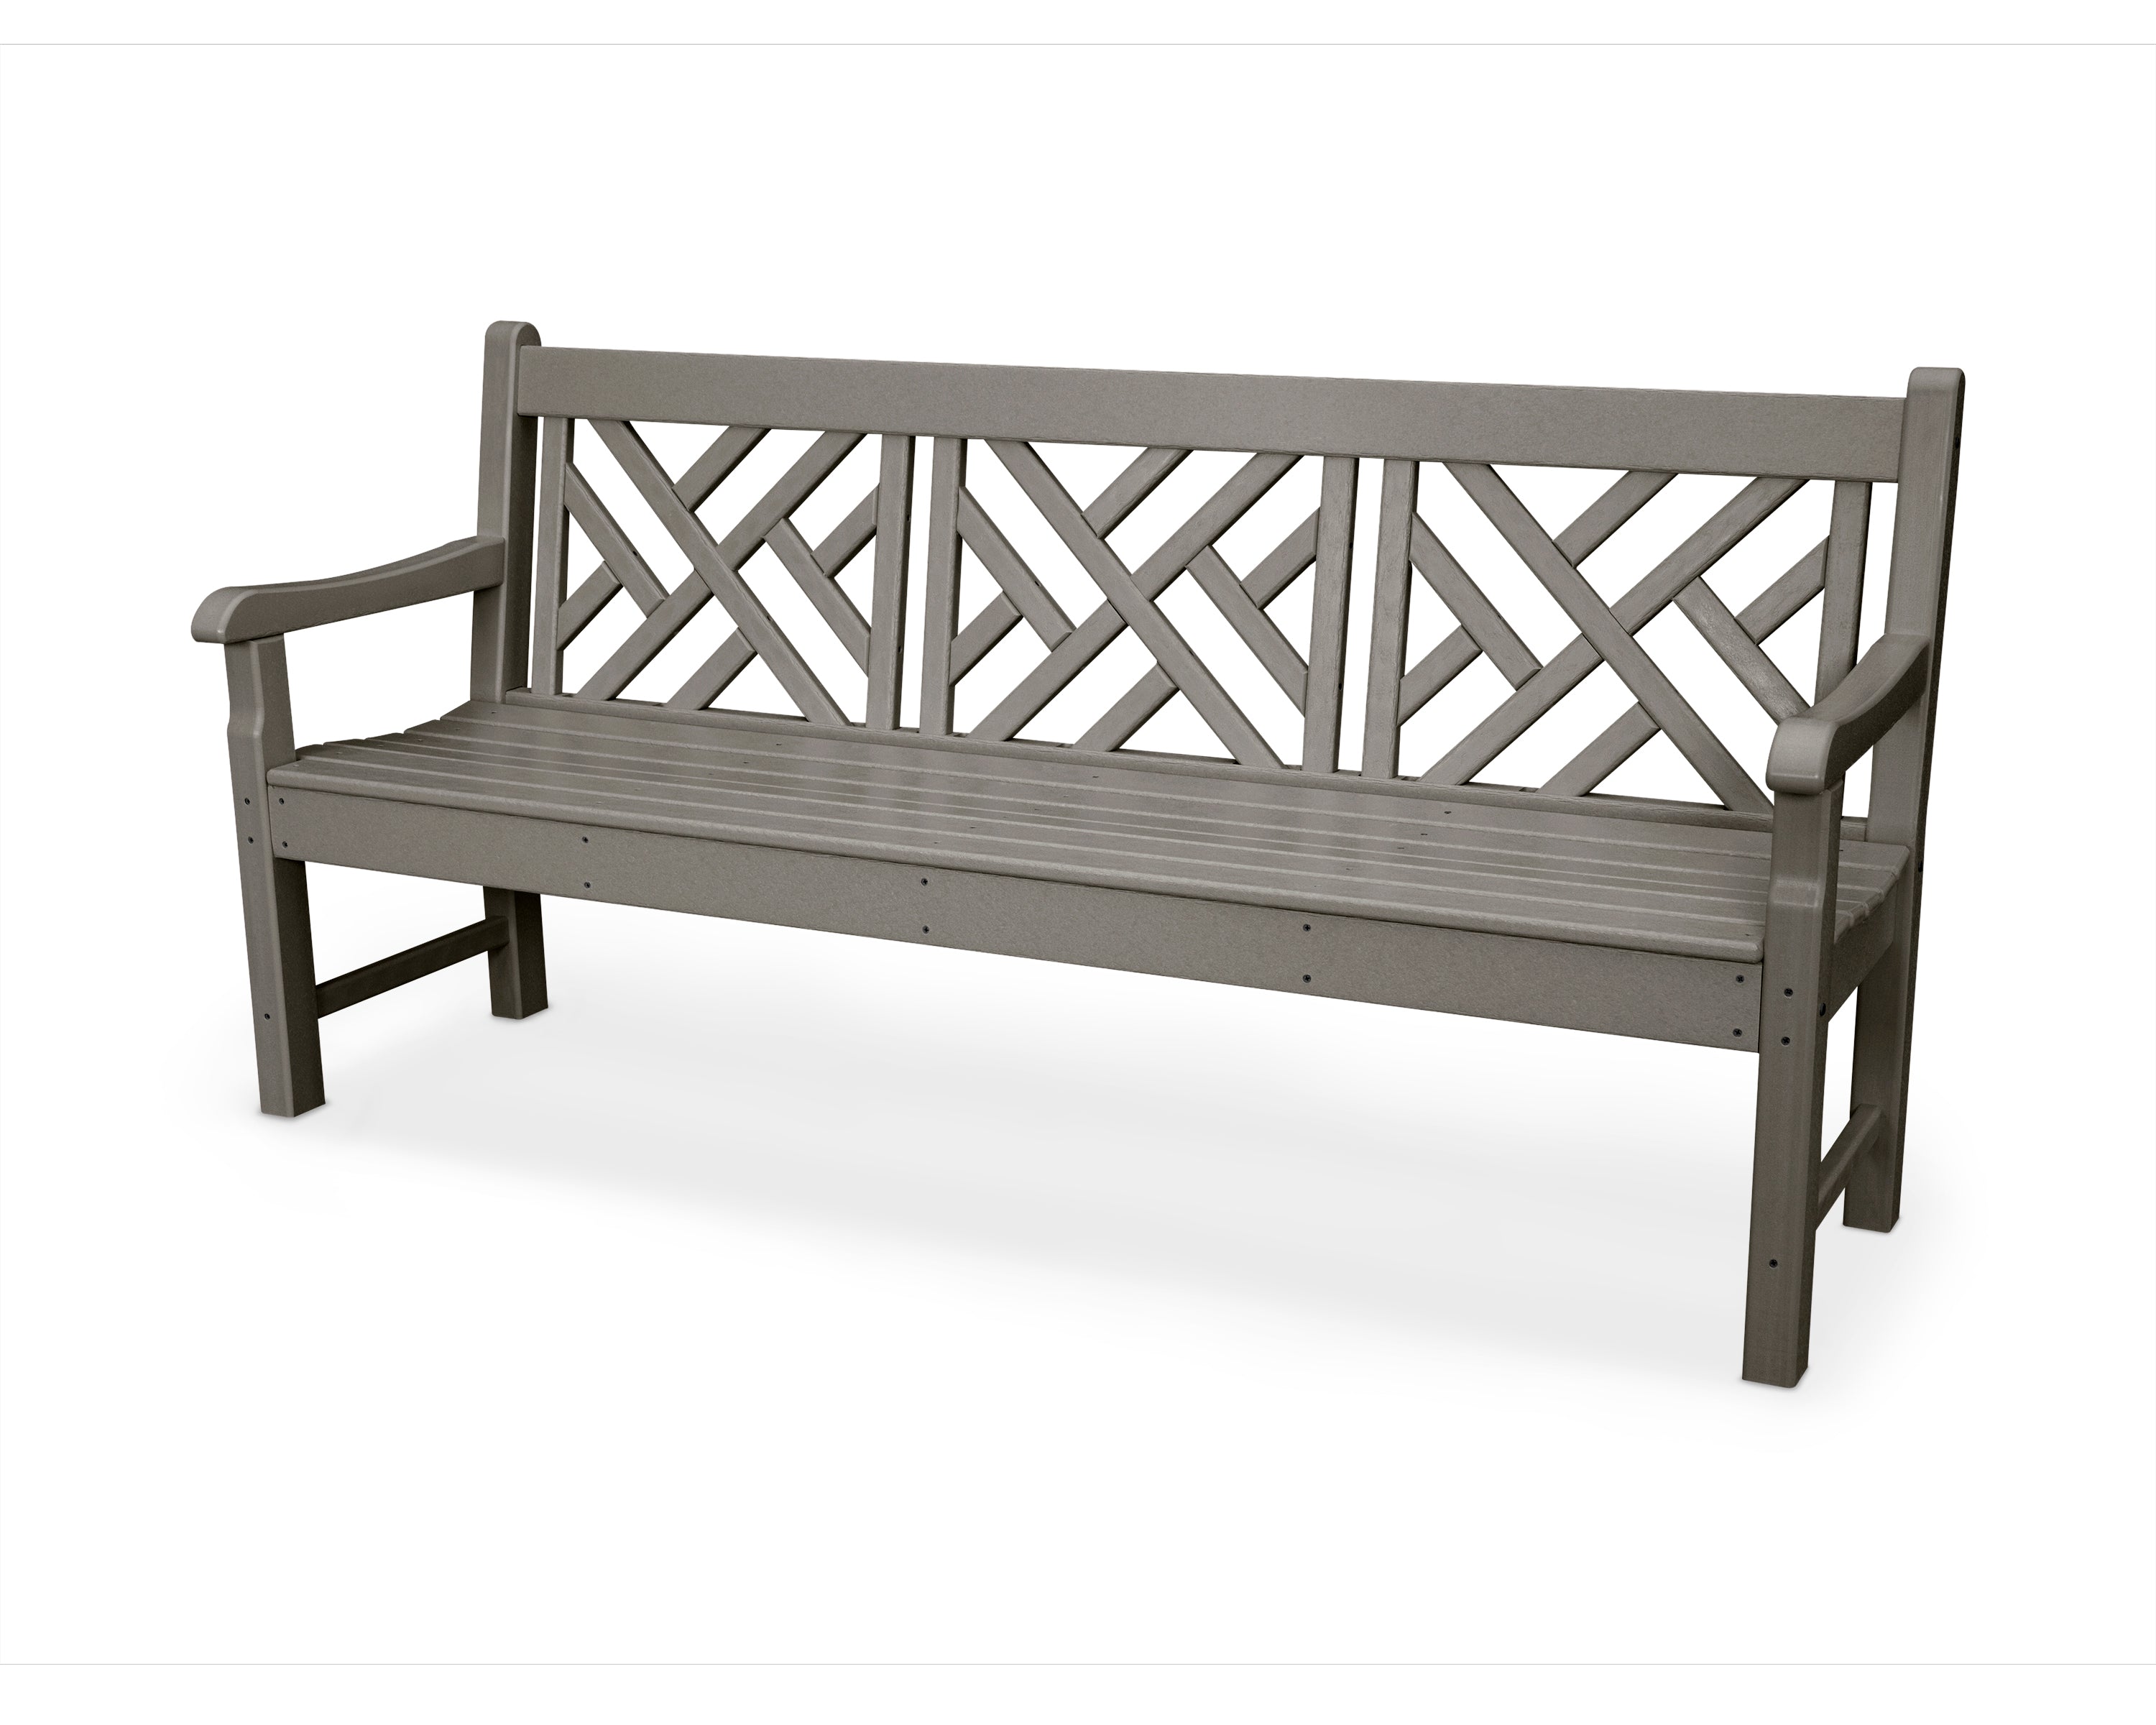 POLYWOOD® Rockford 72" Chippendale Bench in Slate Grey